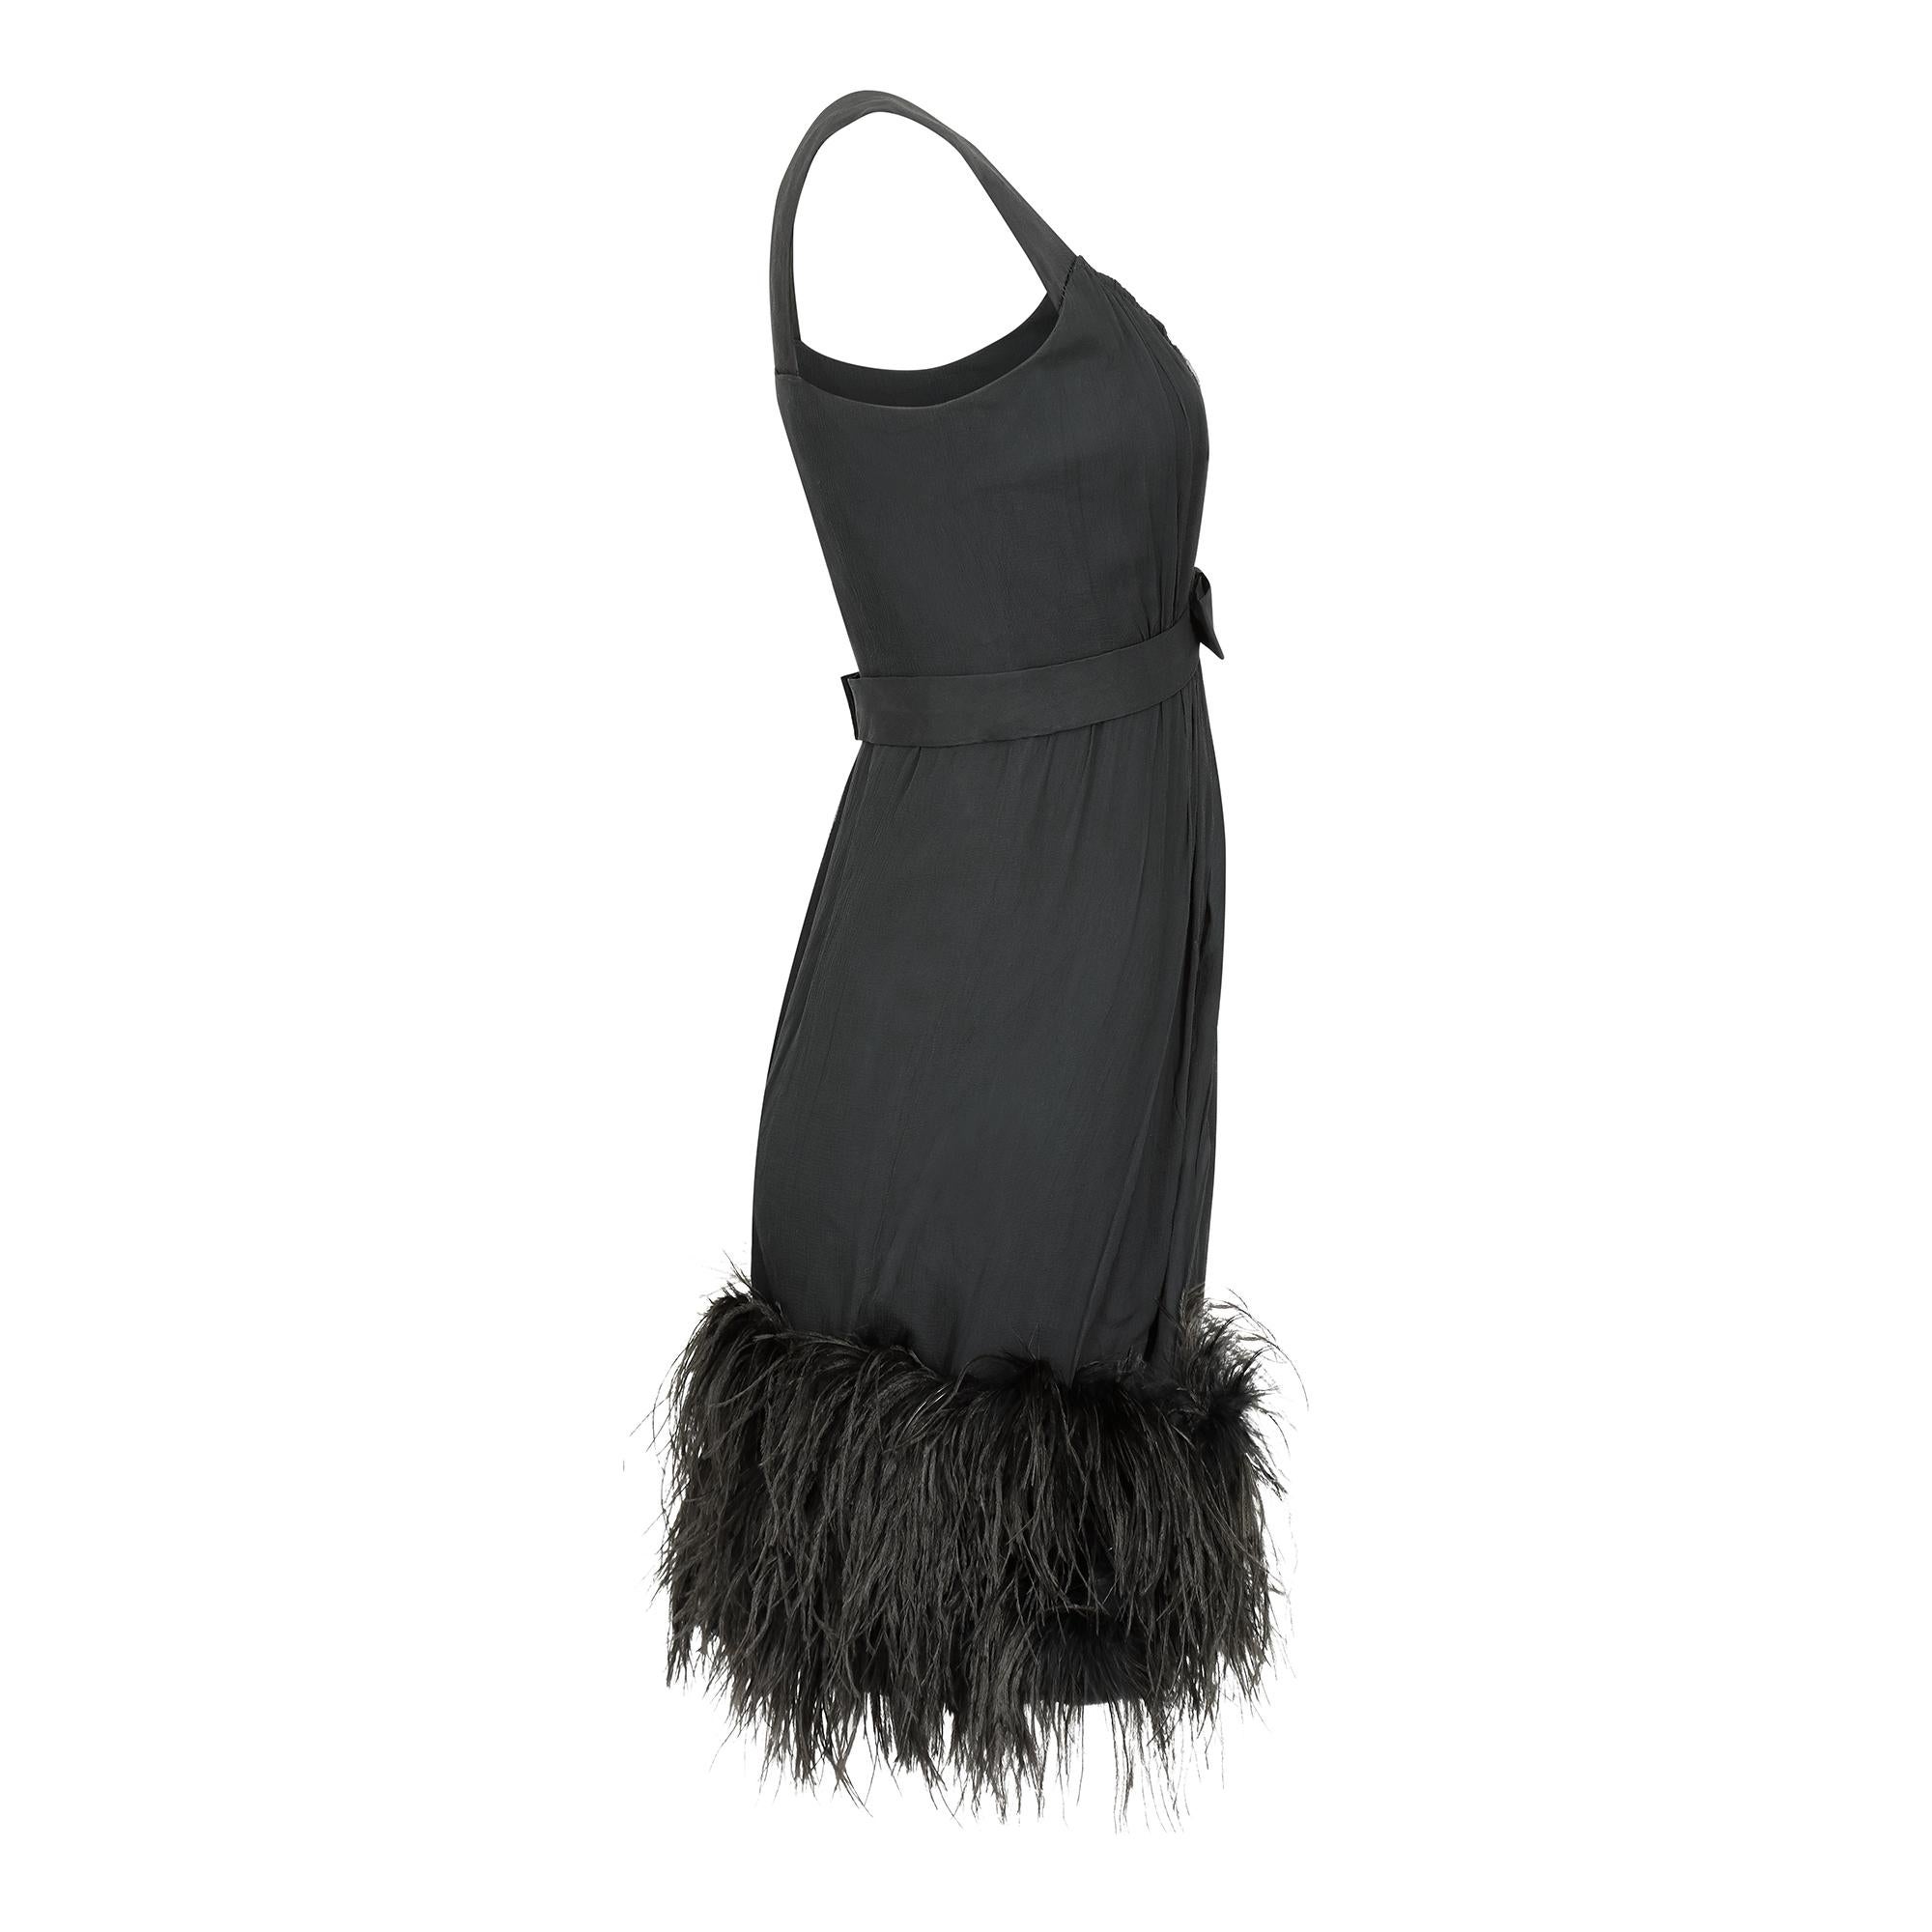 This is a superbly executed and original early 1960s French made black silk crepe de chine feather dress. Of detailed construction and quality, sadly the label has been lost but it has clearly been executed to haute couture standards. The dress has